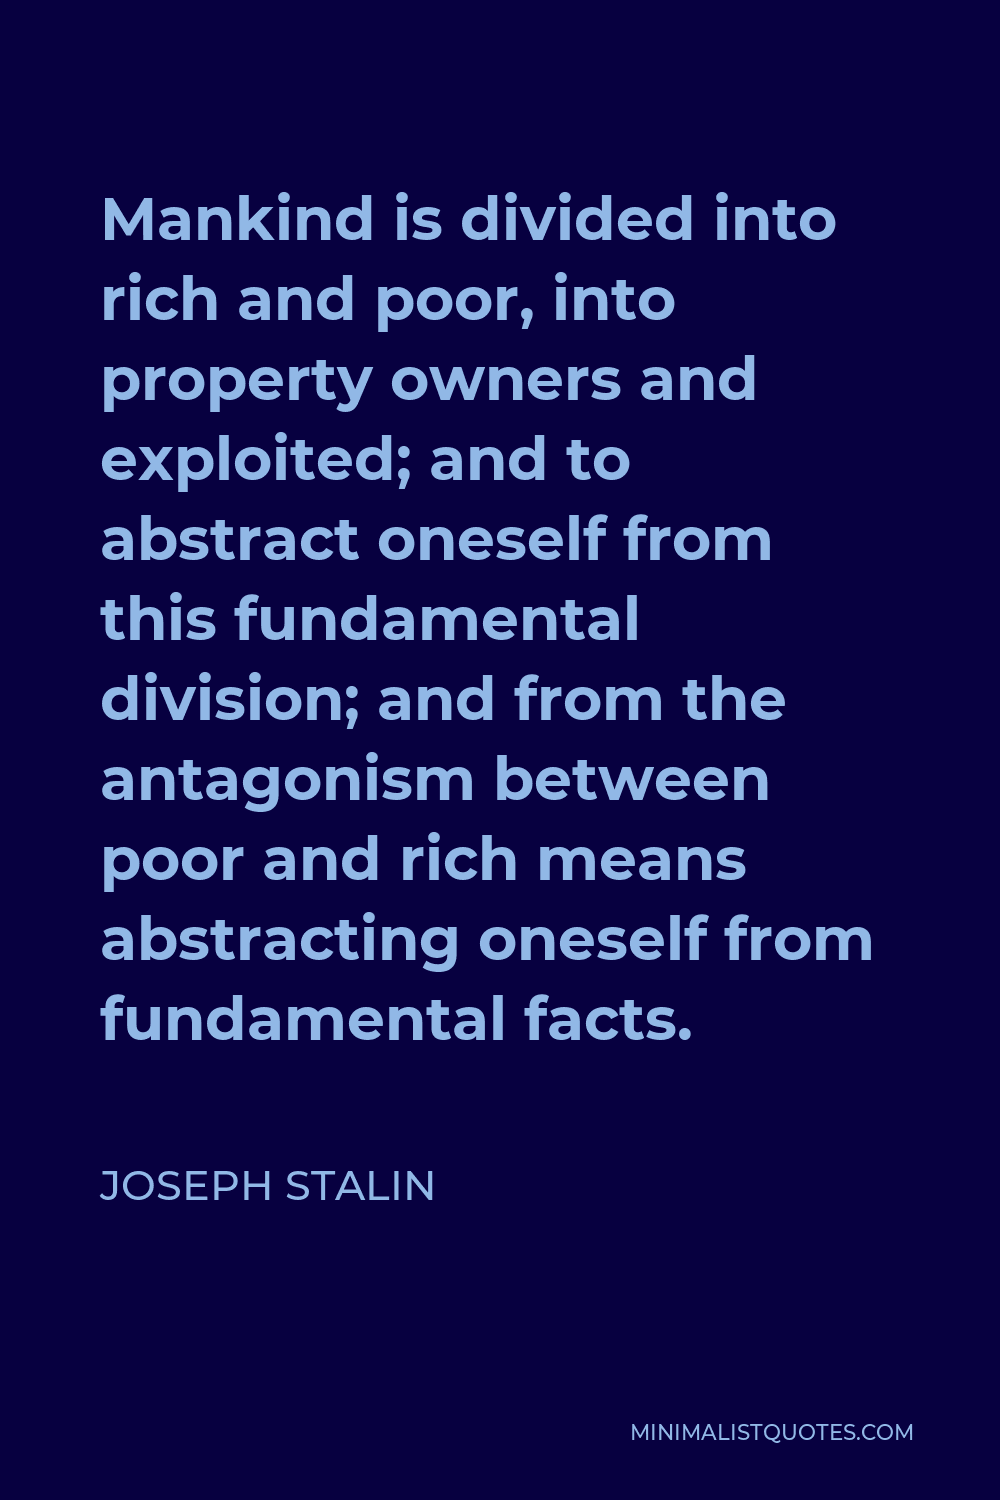 Joseph Stalin Quote - Mankind is divided into rich and poor, into property owners and exploited; and to abstract oneself from this fundamental division; and from the antagonism between poor and rich means abstracting oneself from fundamental facts.